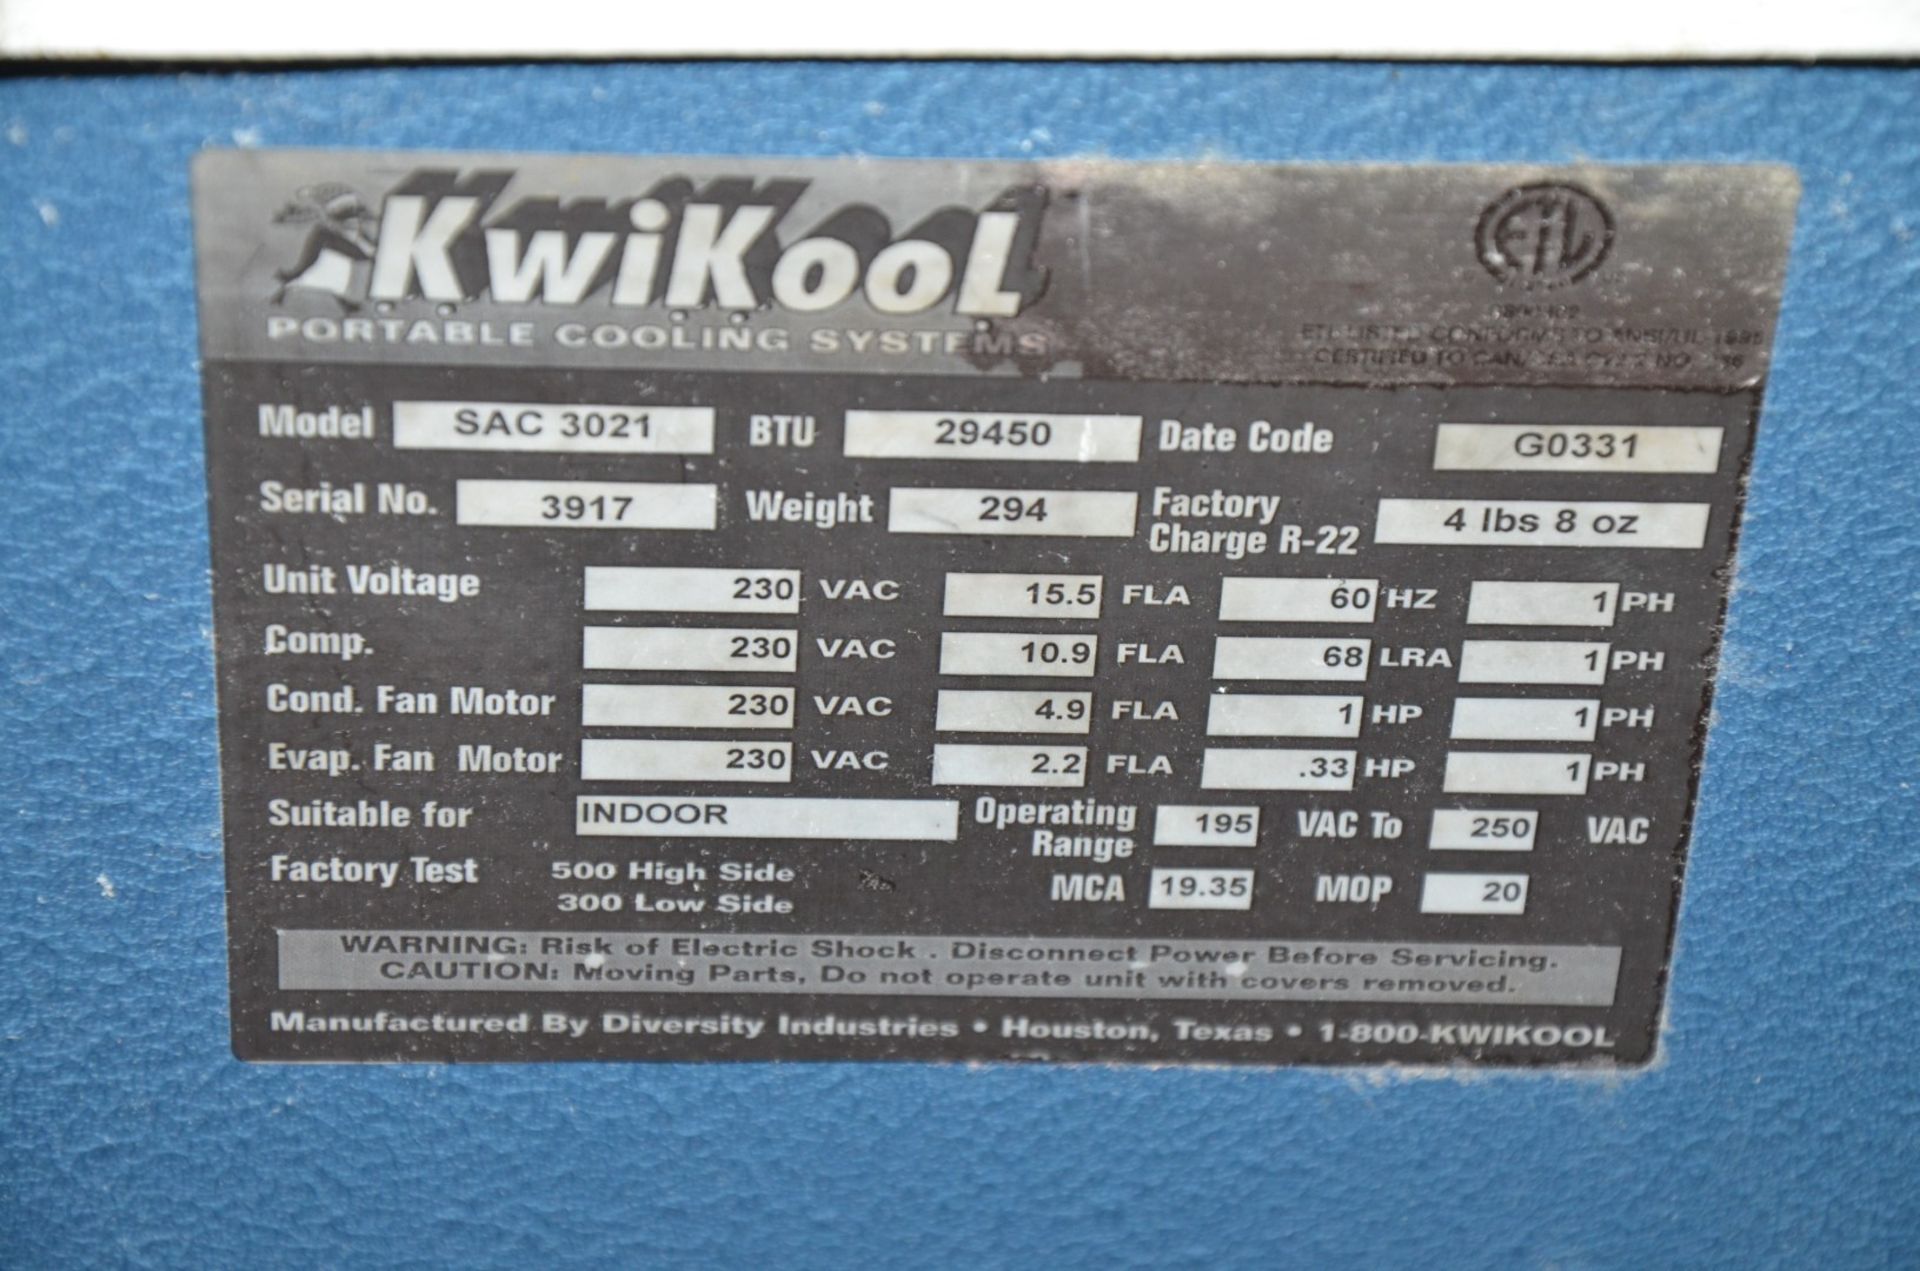 KWIKOOL SAC 3021 PORTABLE HEAVY DUTY AIR CONDITIONER WITH 29,450 BTU CAPACITY, S/N 3917 (CI) [ - Image 3 of 3